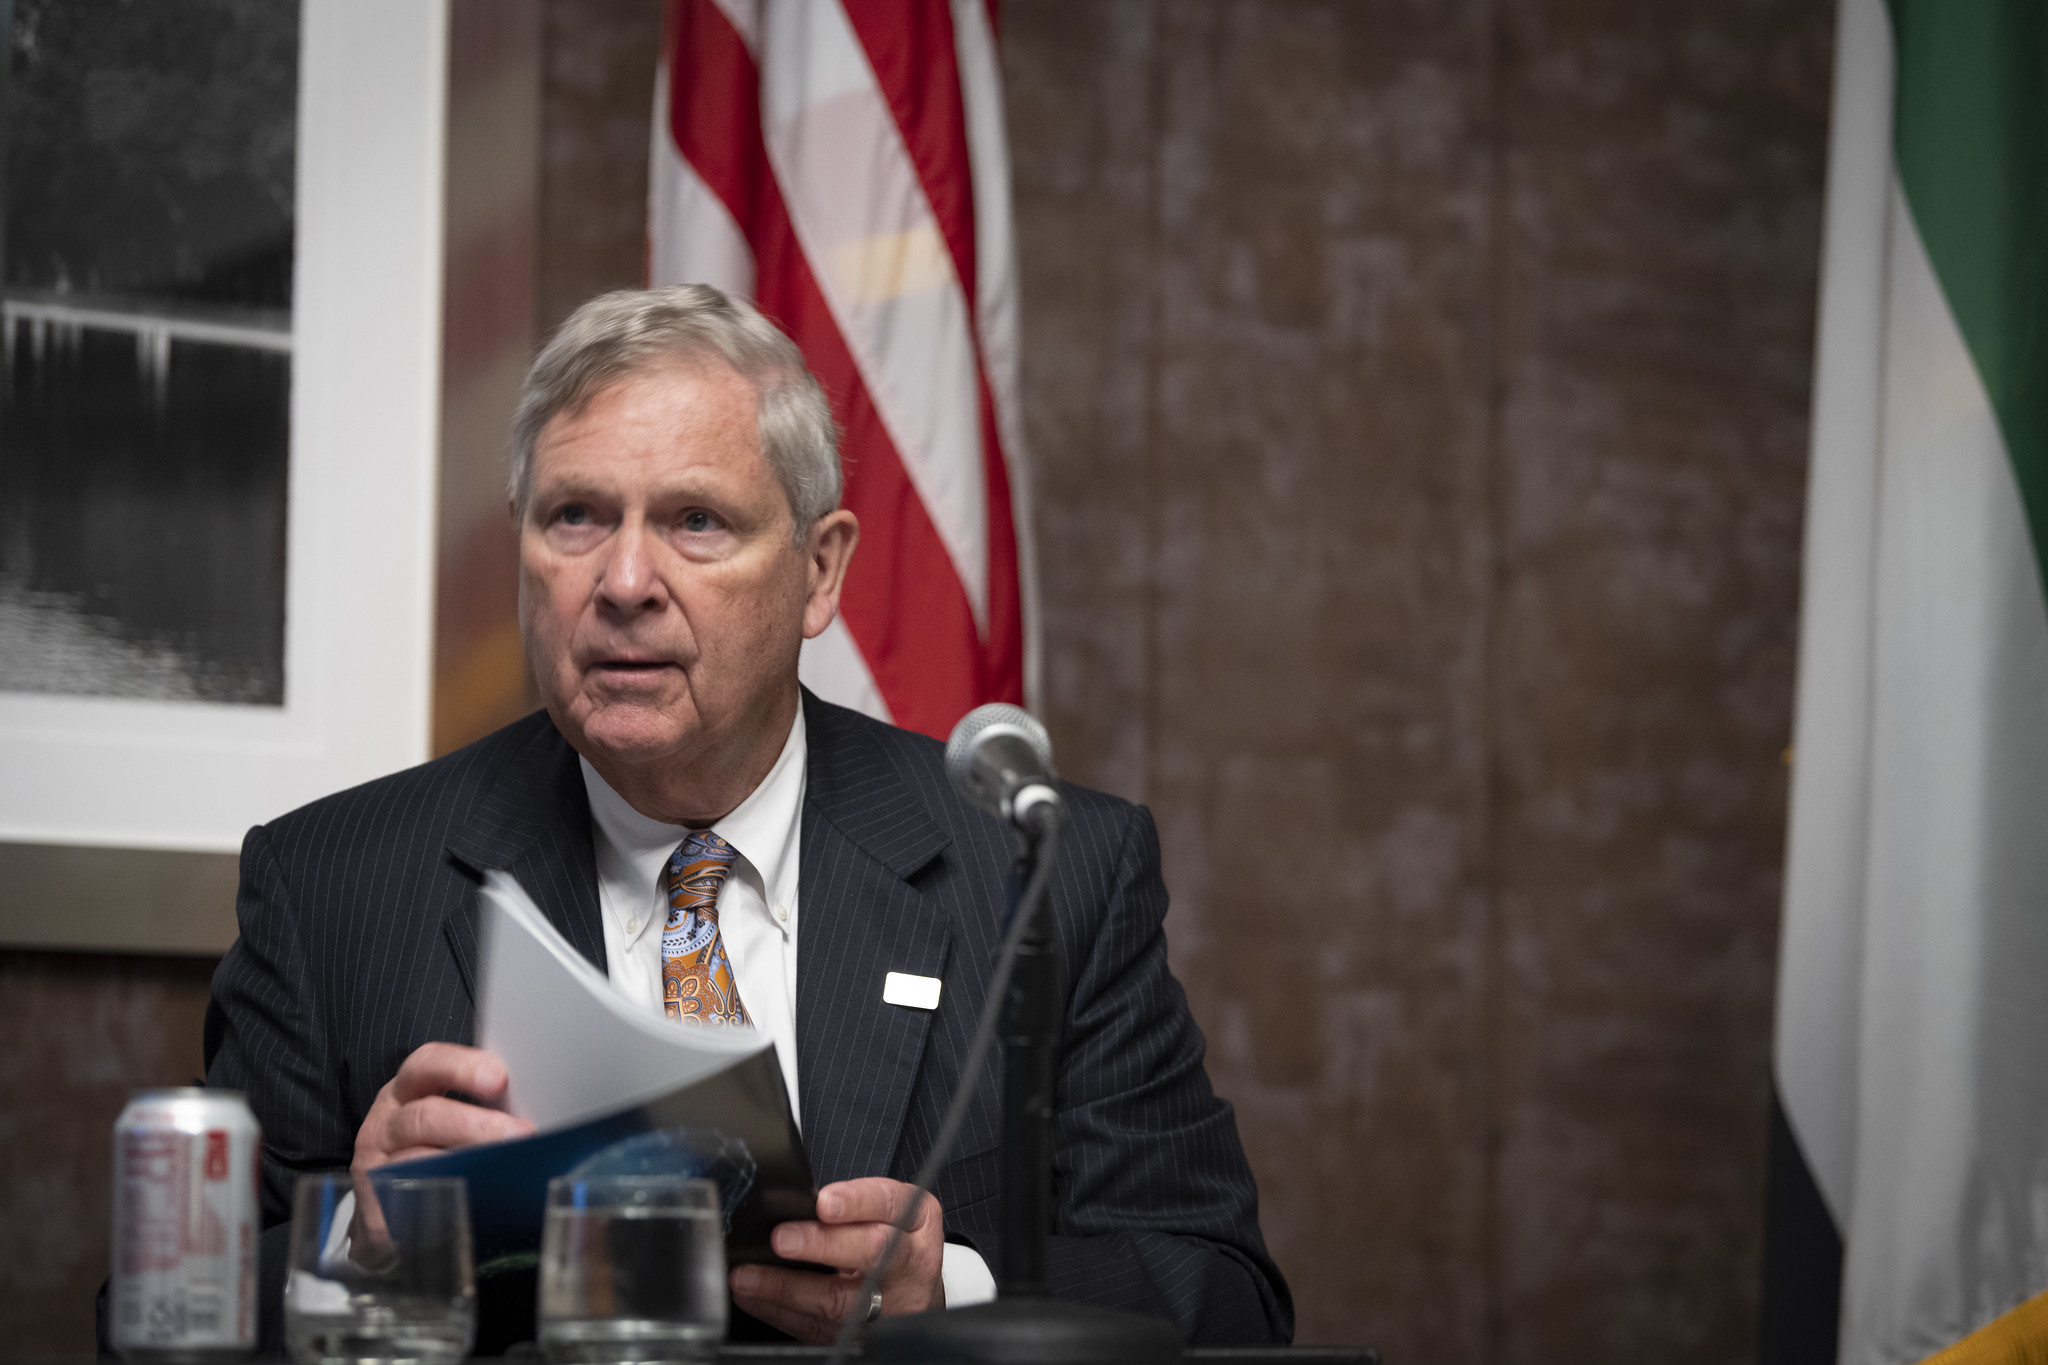 Agriculture Secretary Tom Vilsack sits at a table before a microphone against a backdrop of an American flag and United Arab Emirates flag at the AIM for Climate Summit in Washington.